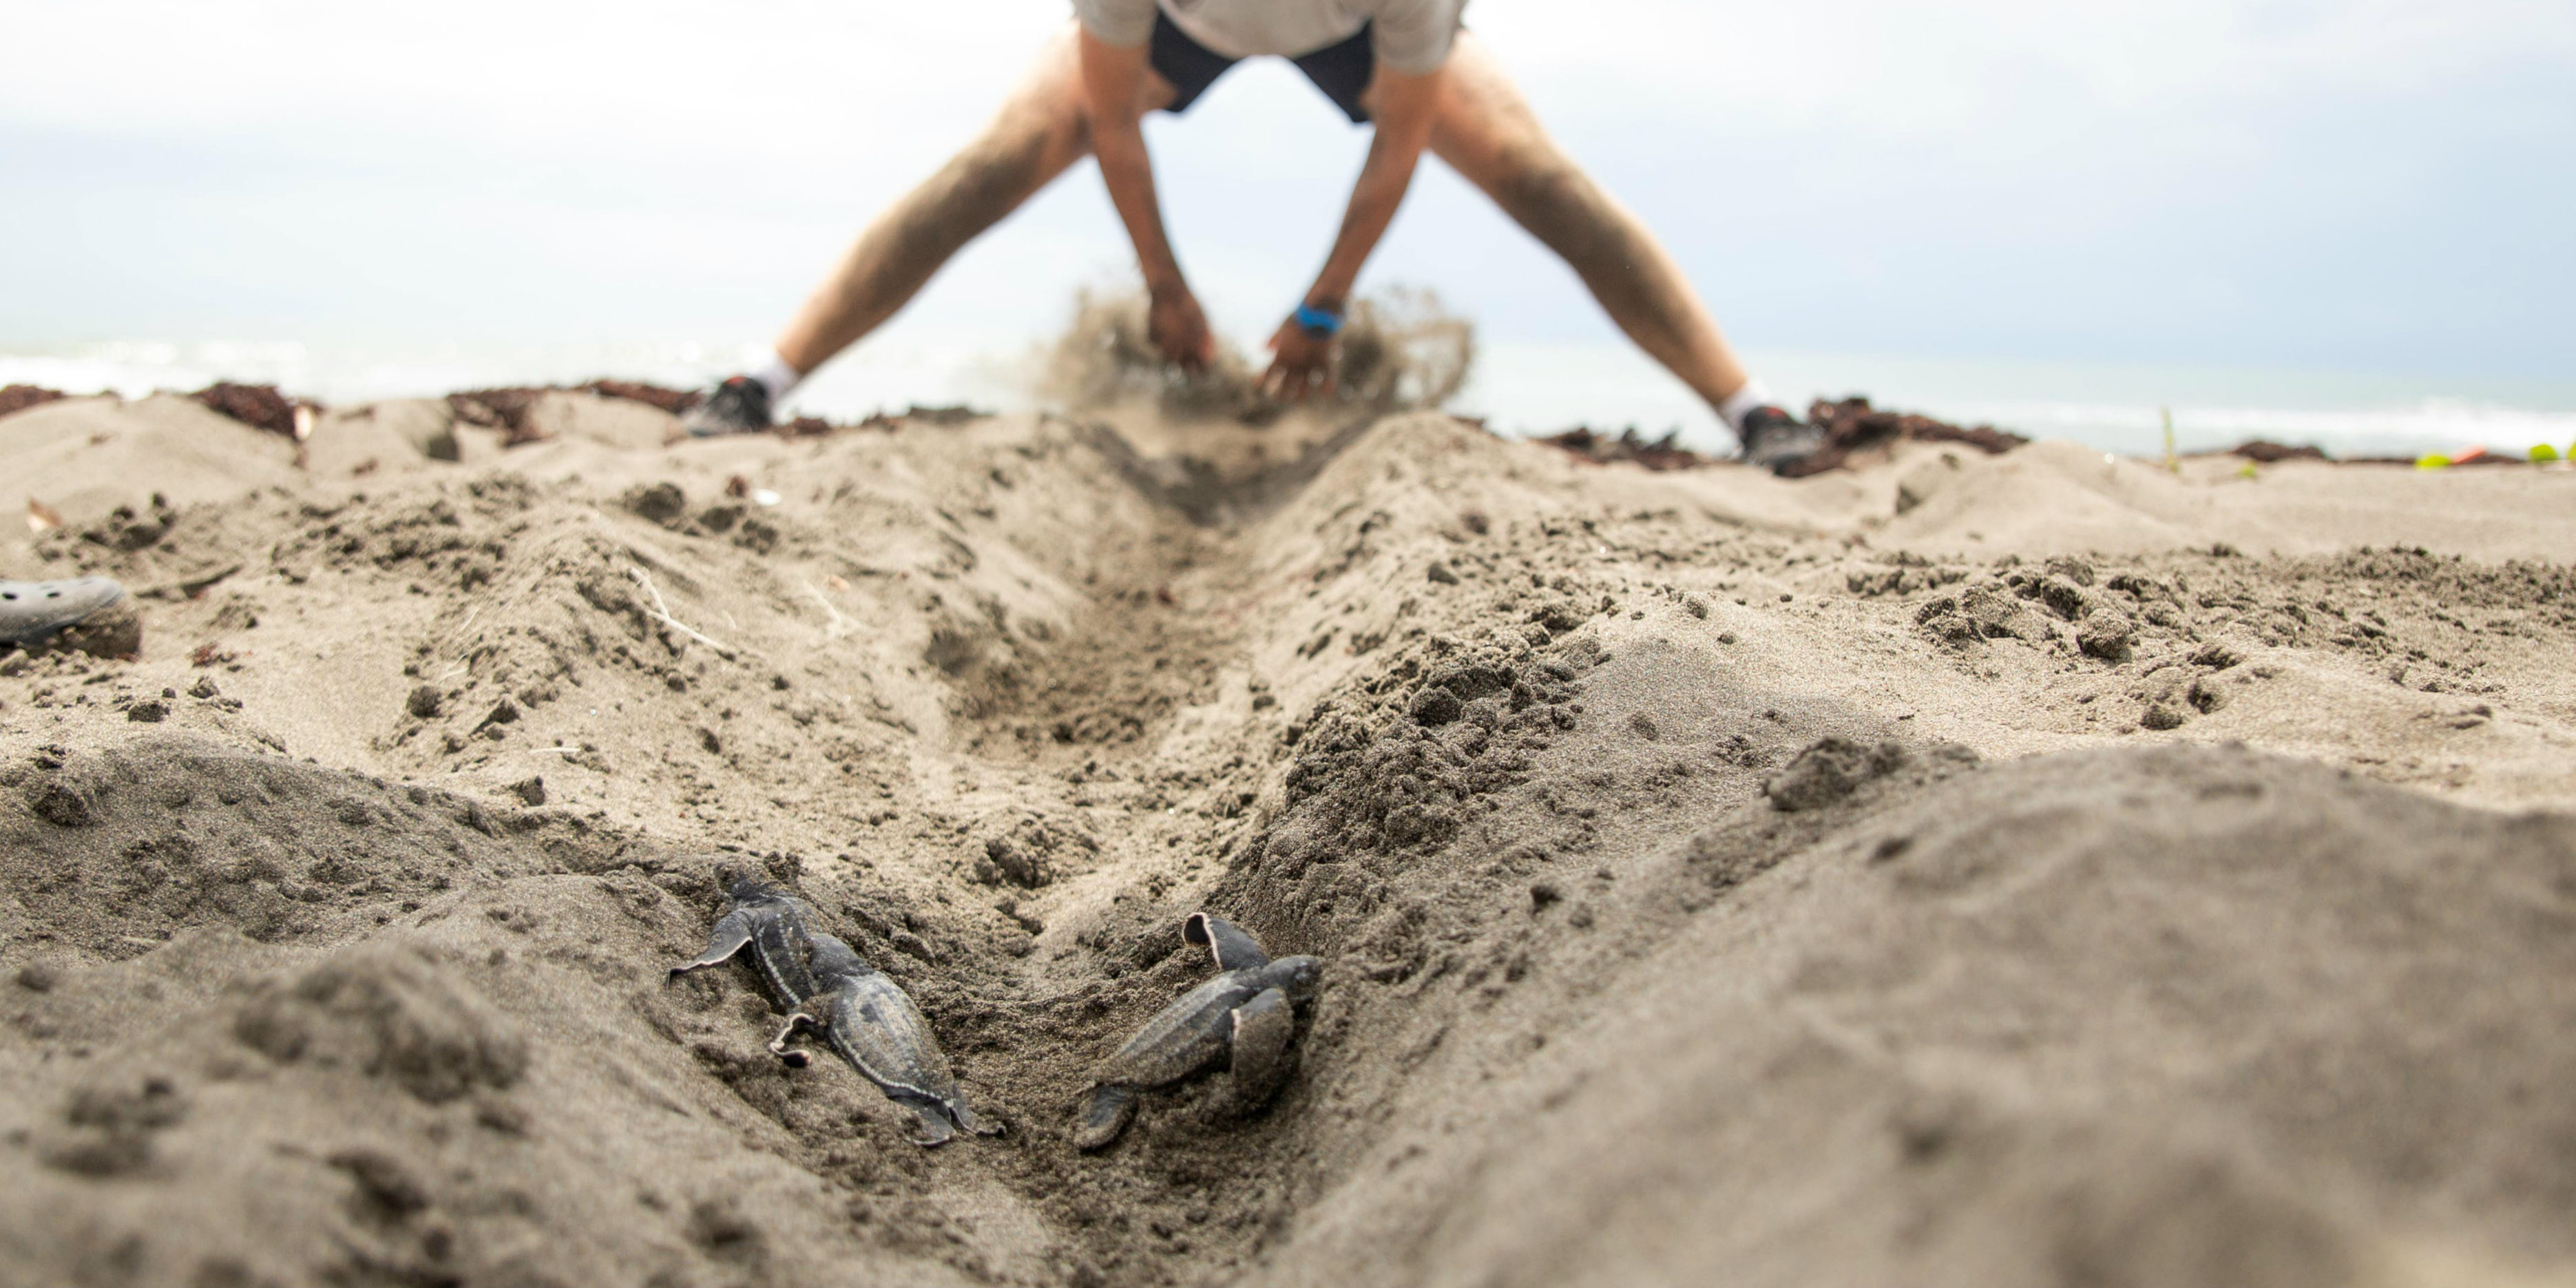 A GVI participant clears a path for sea turtles in costa rica, to help them make their way safely to sea.